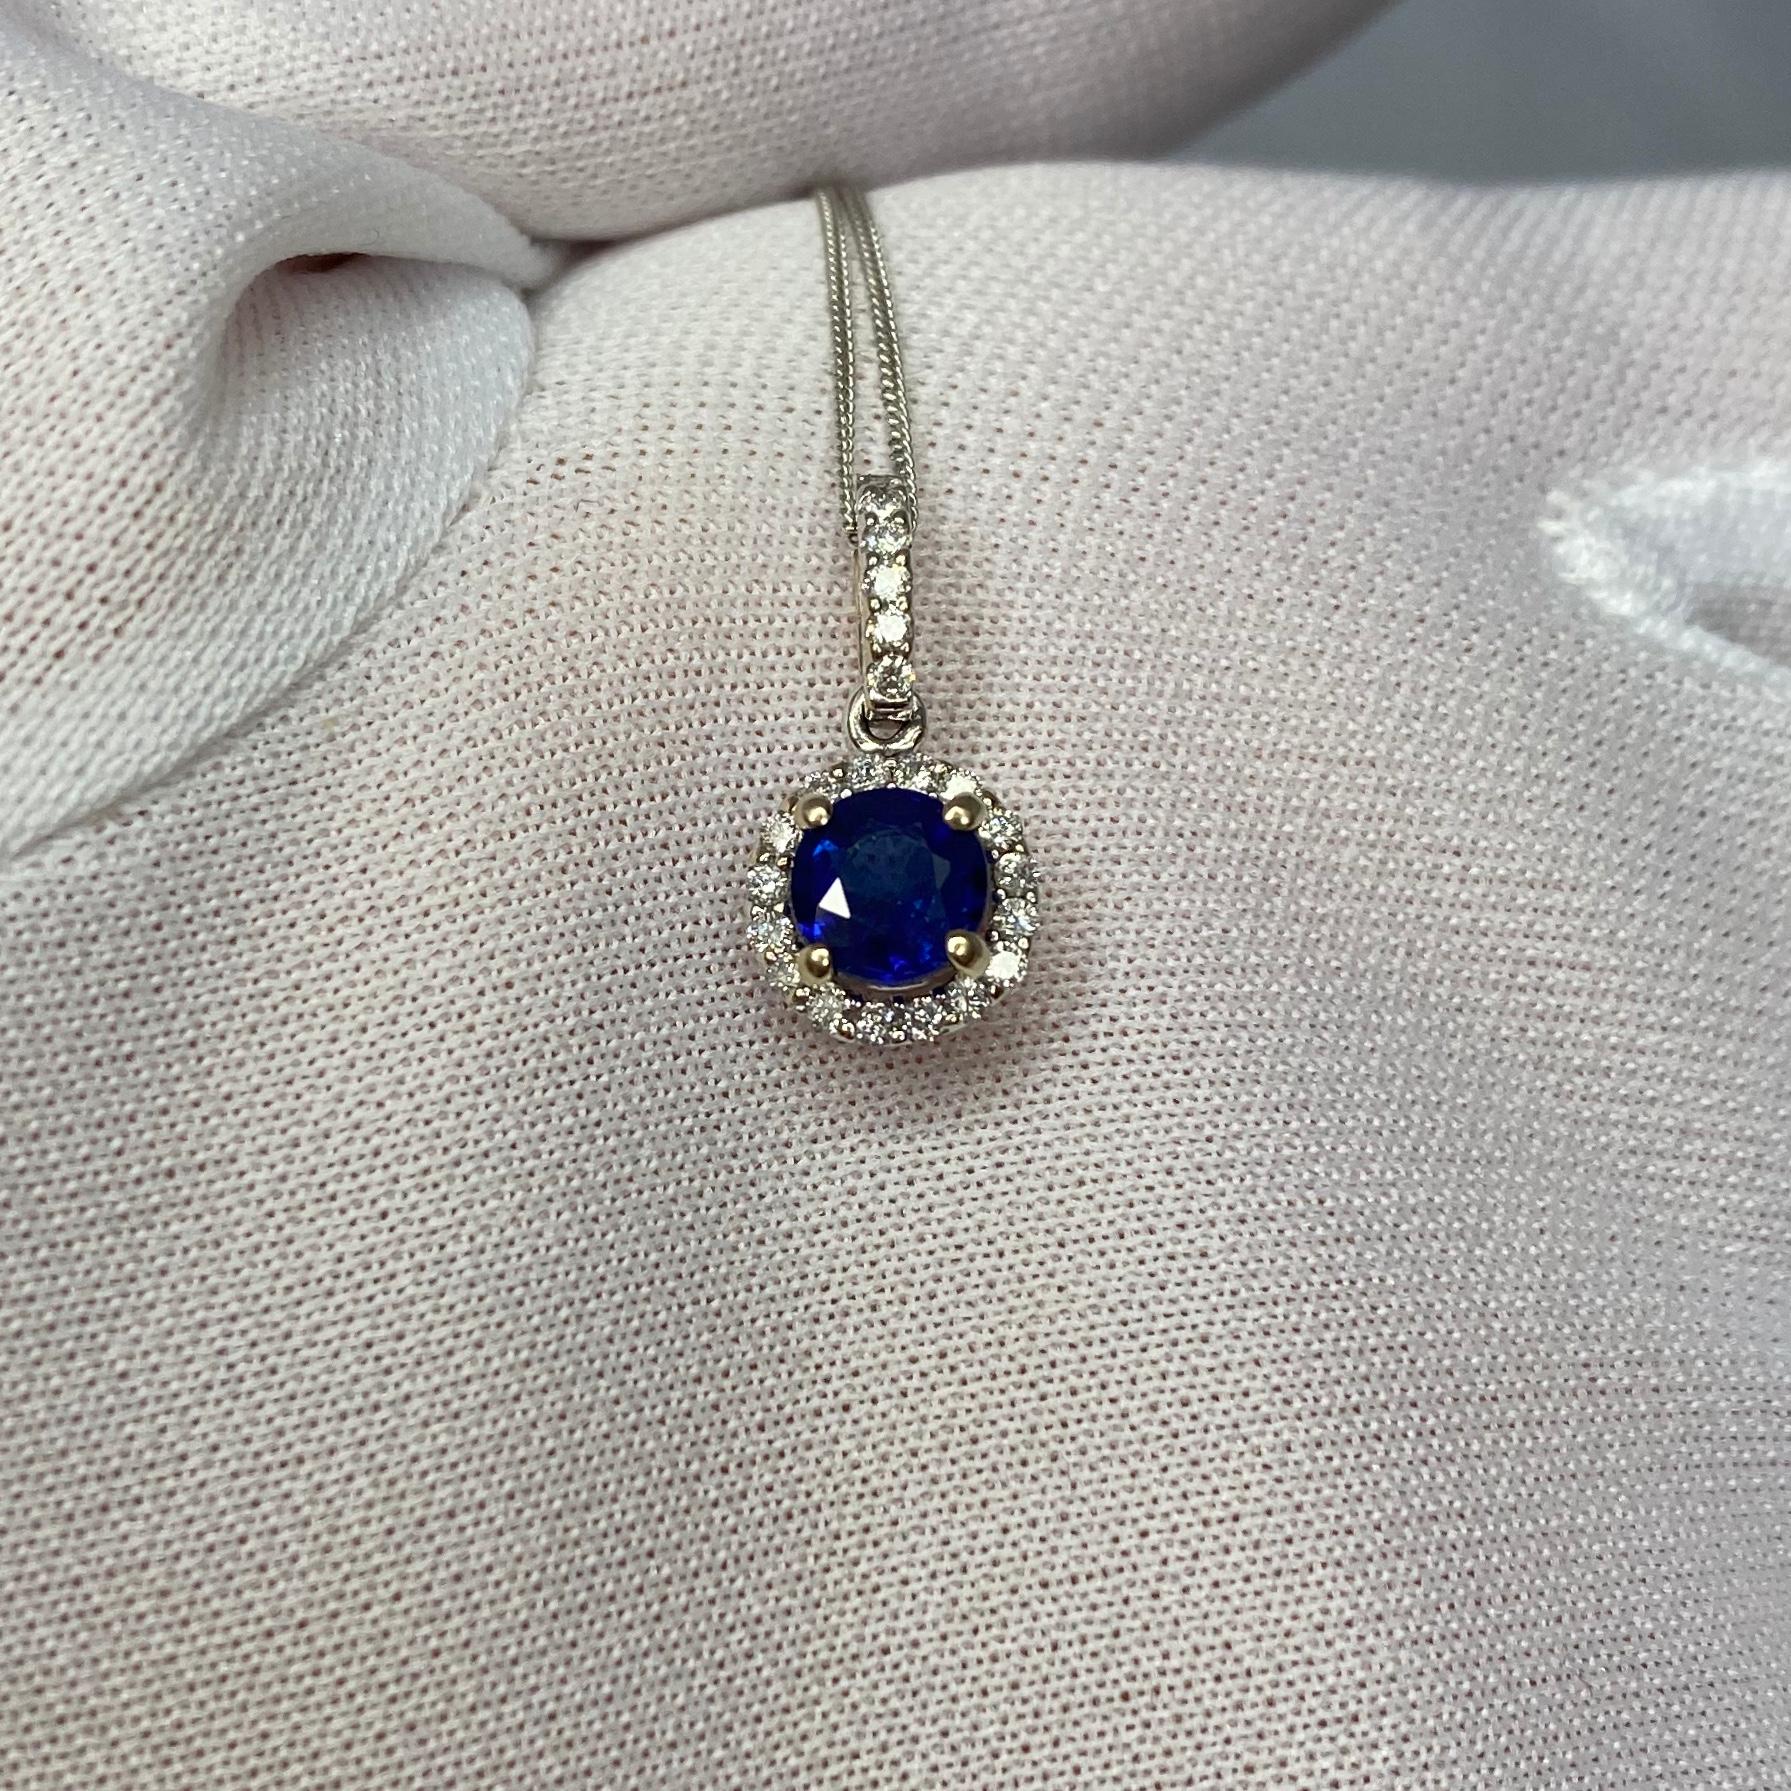 Stunning natural deep blue sapphire set in a fine 18k white gold diamond cluster pendant.

0.69 carat centre sapphire with a deep blue colour and good clarity.
Some small inclusions when looking closely but not a dirty stone.

The pendant is hanging